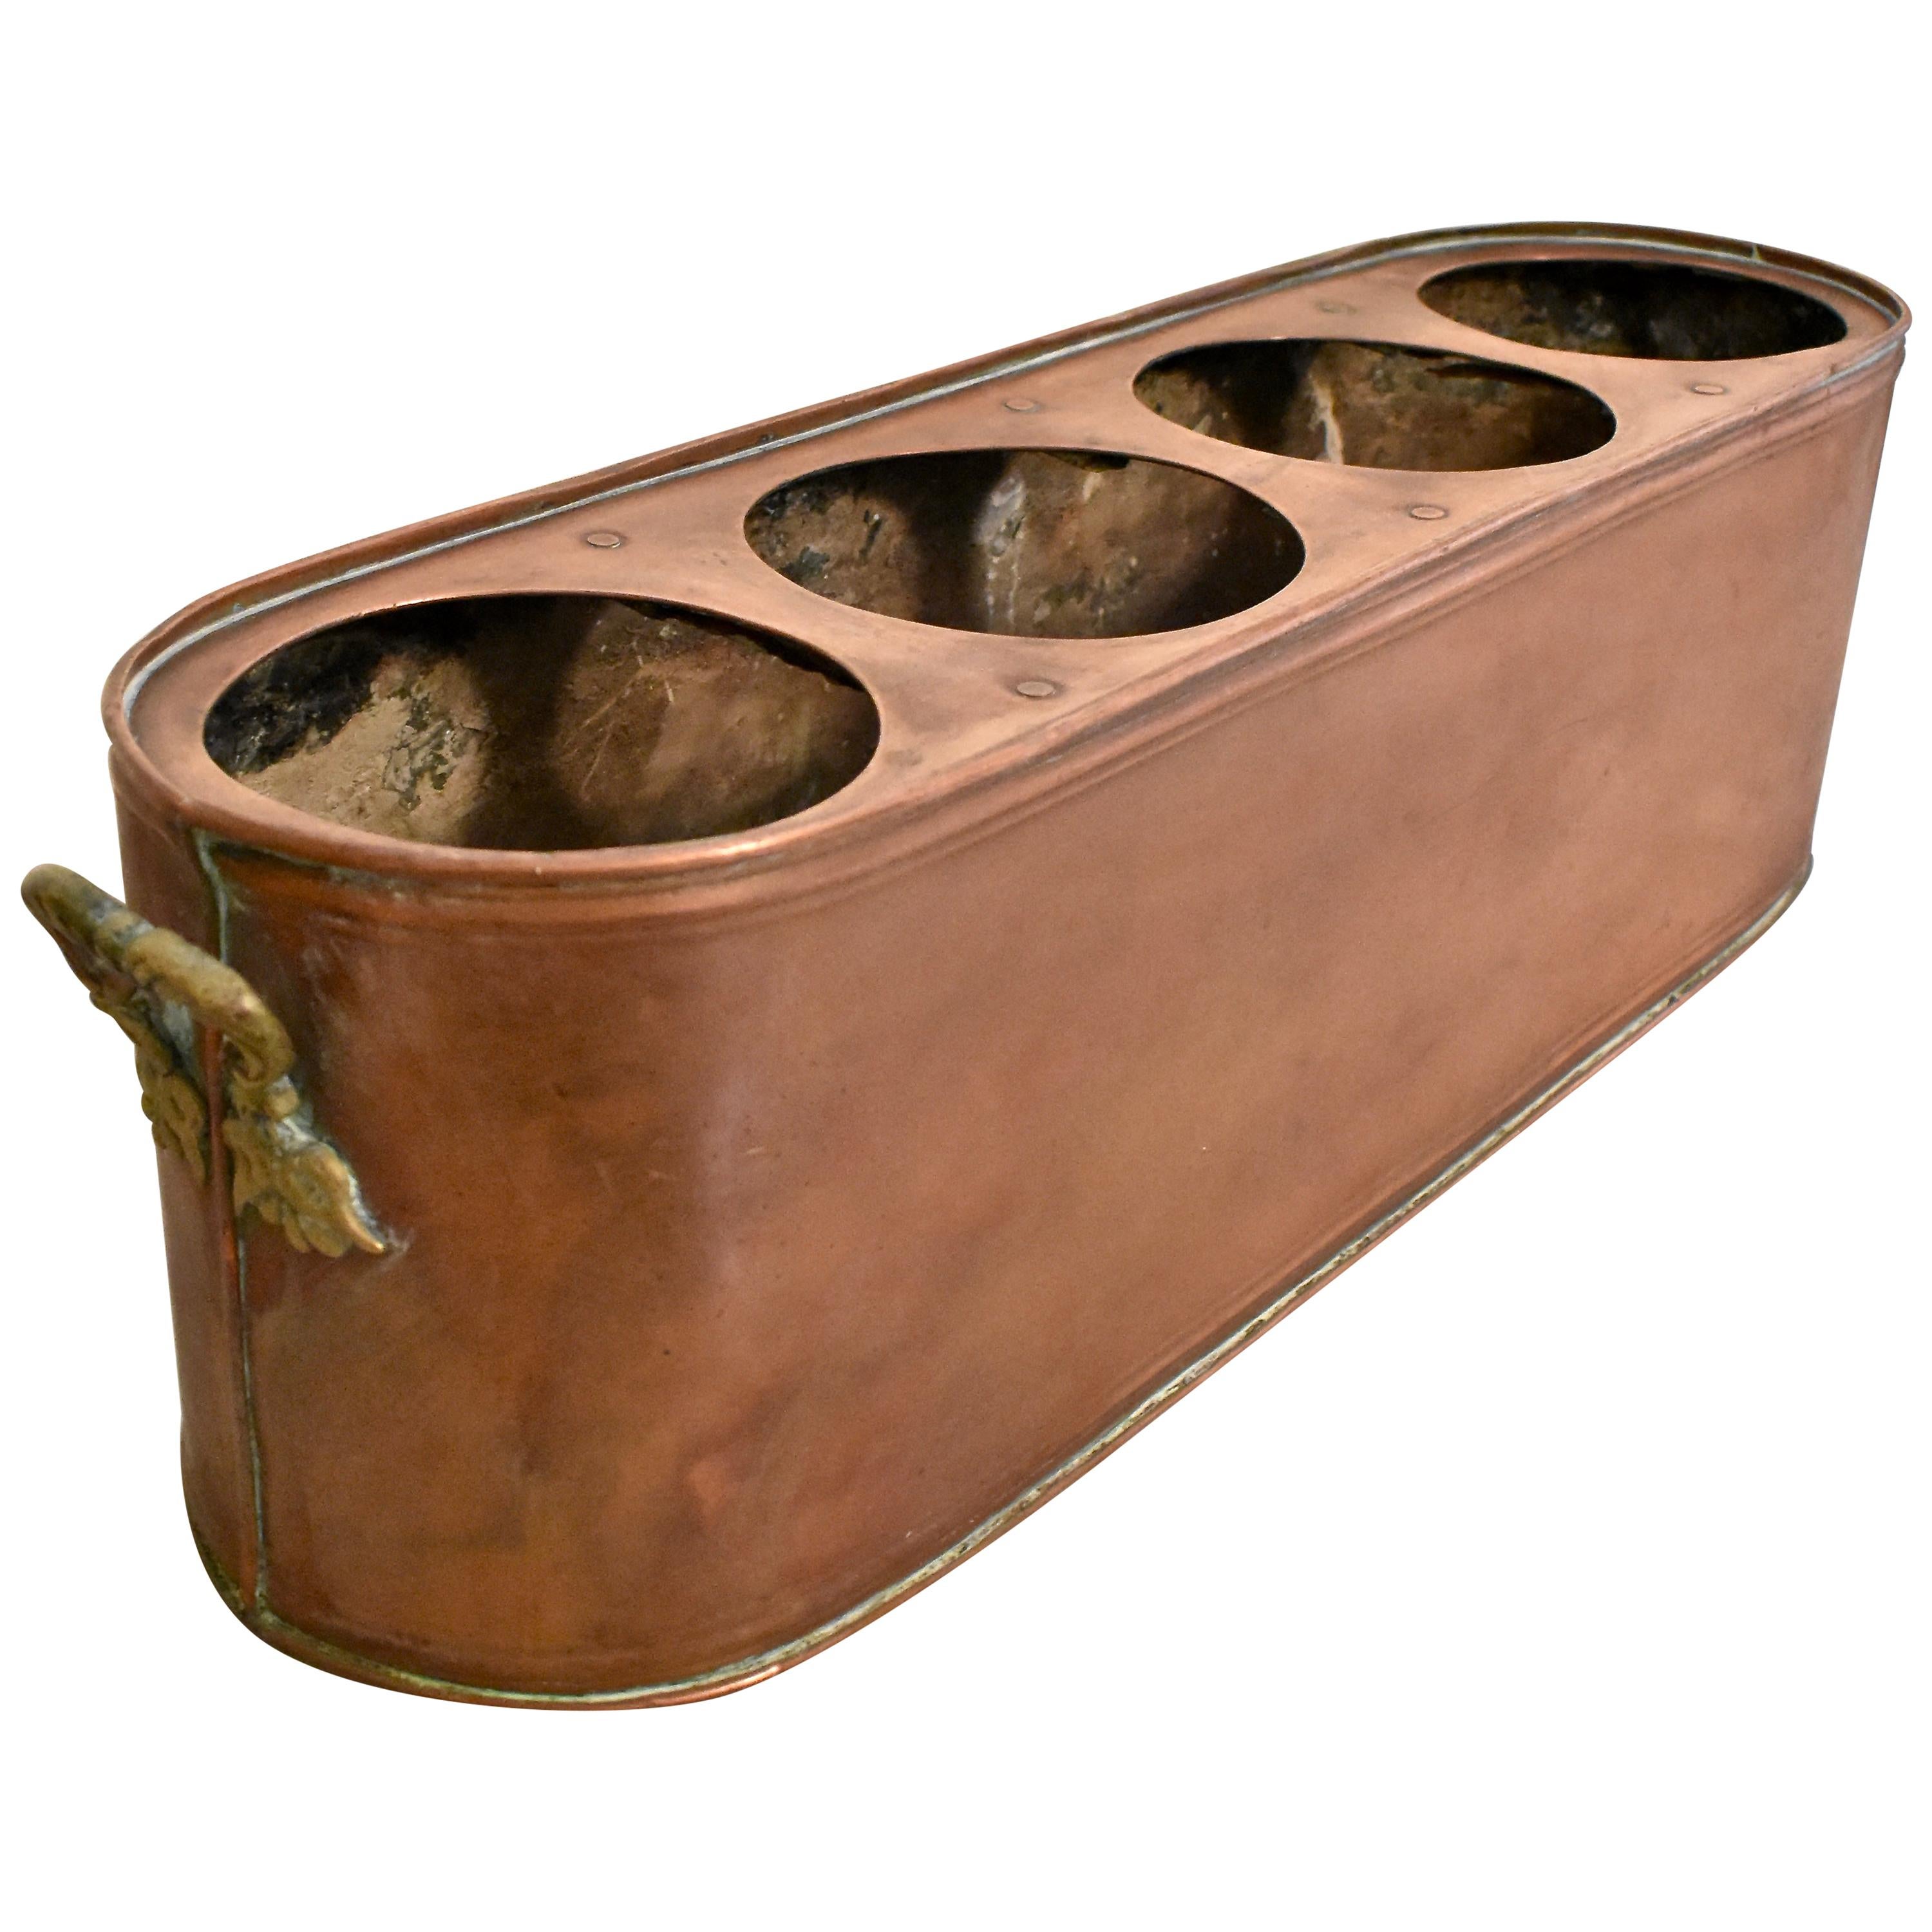 Rustic Country French Copper & Brass Handled Potted Plant Jardinière, circa 1900